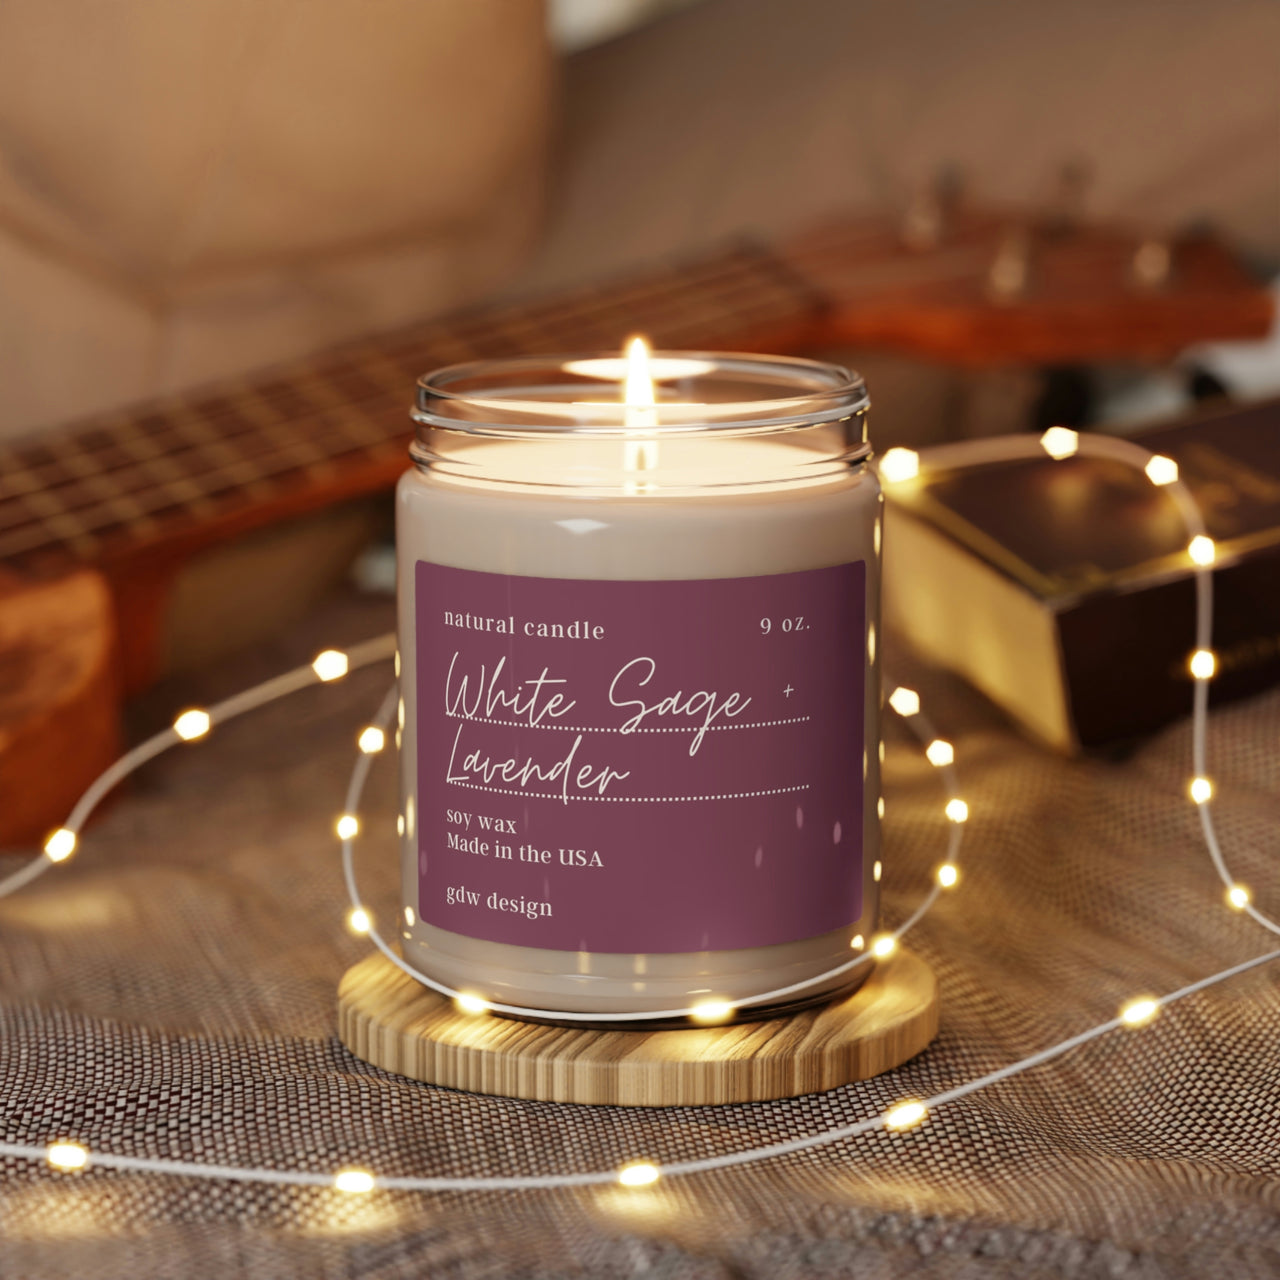 Scented Soy Candle, Clean Cotton, Sea Salt + Orchid, White Sage + Lavender, Candle Gifts 9oz